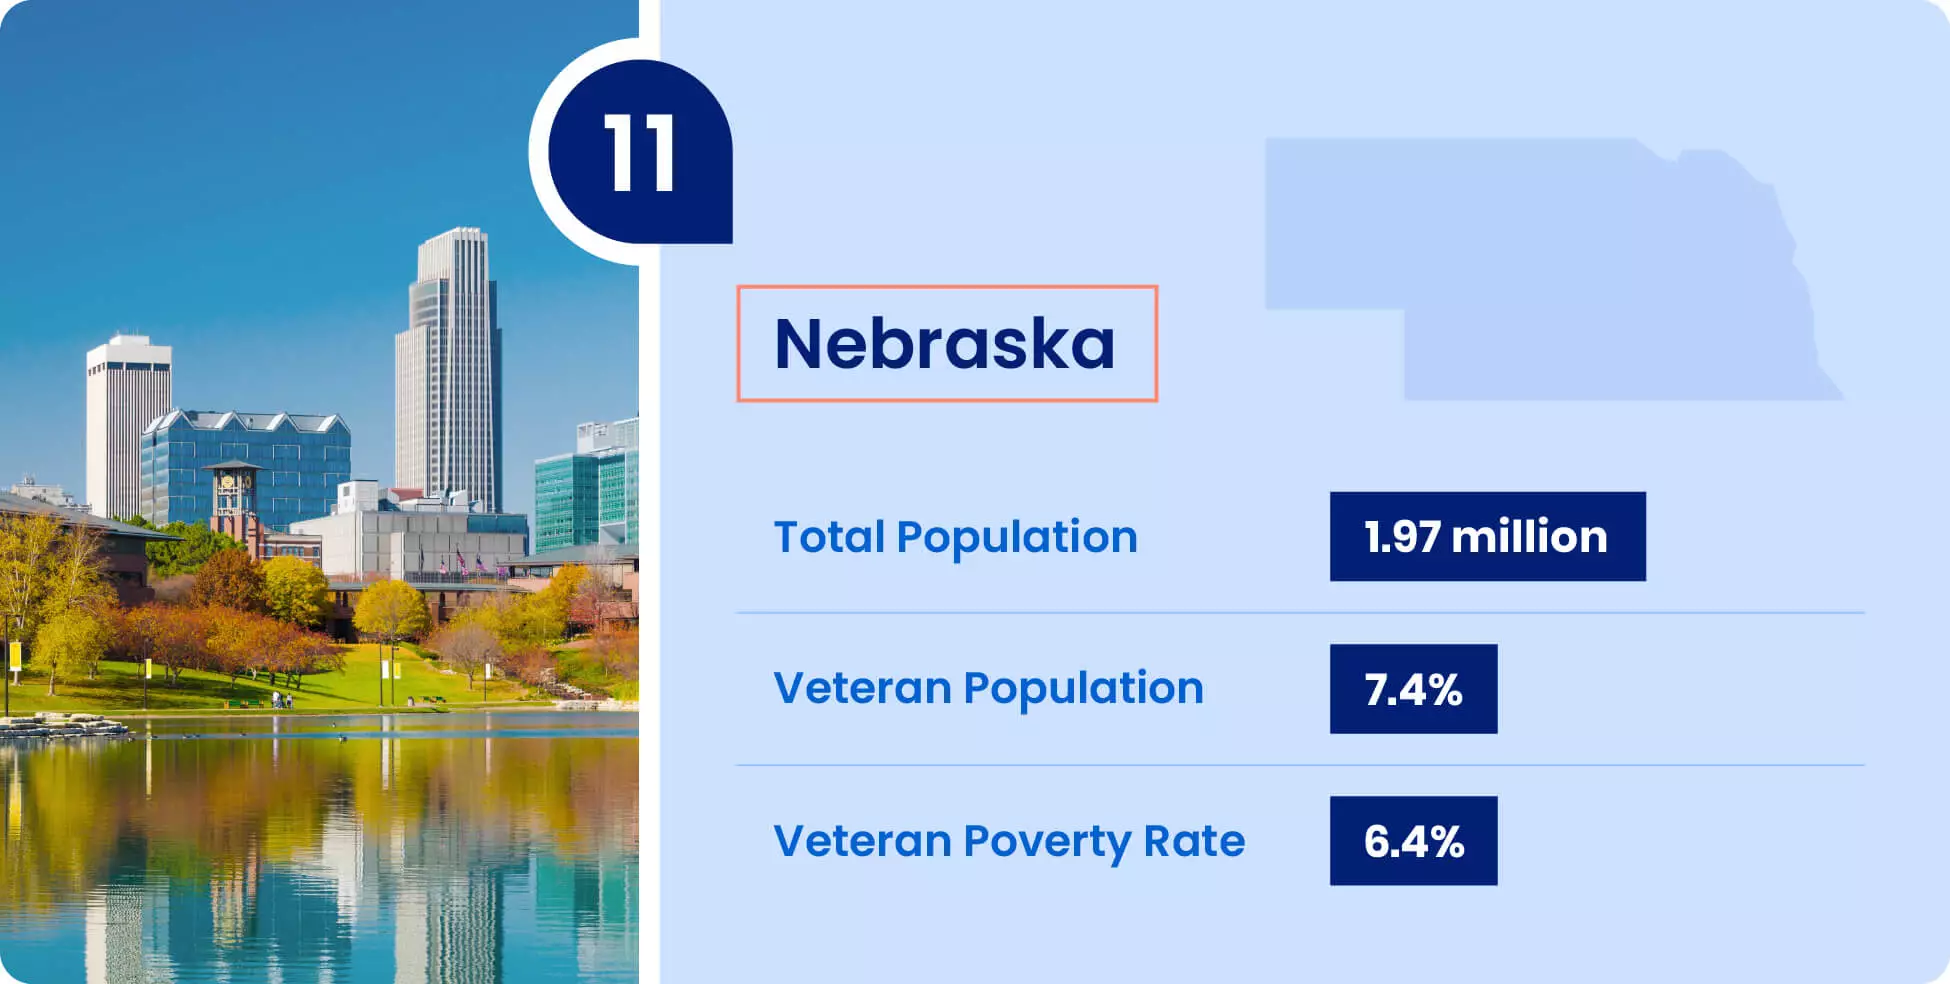 Image shows key information for military retirees thinking of moving to Nebraska.